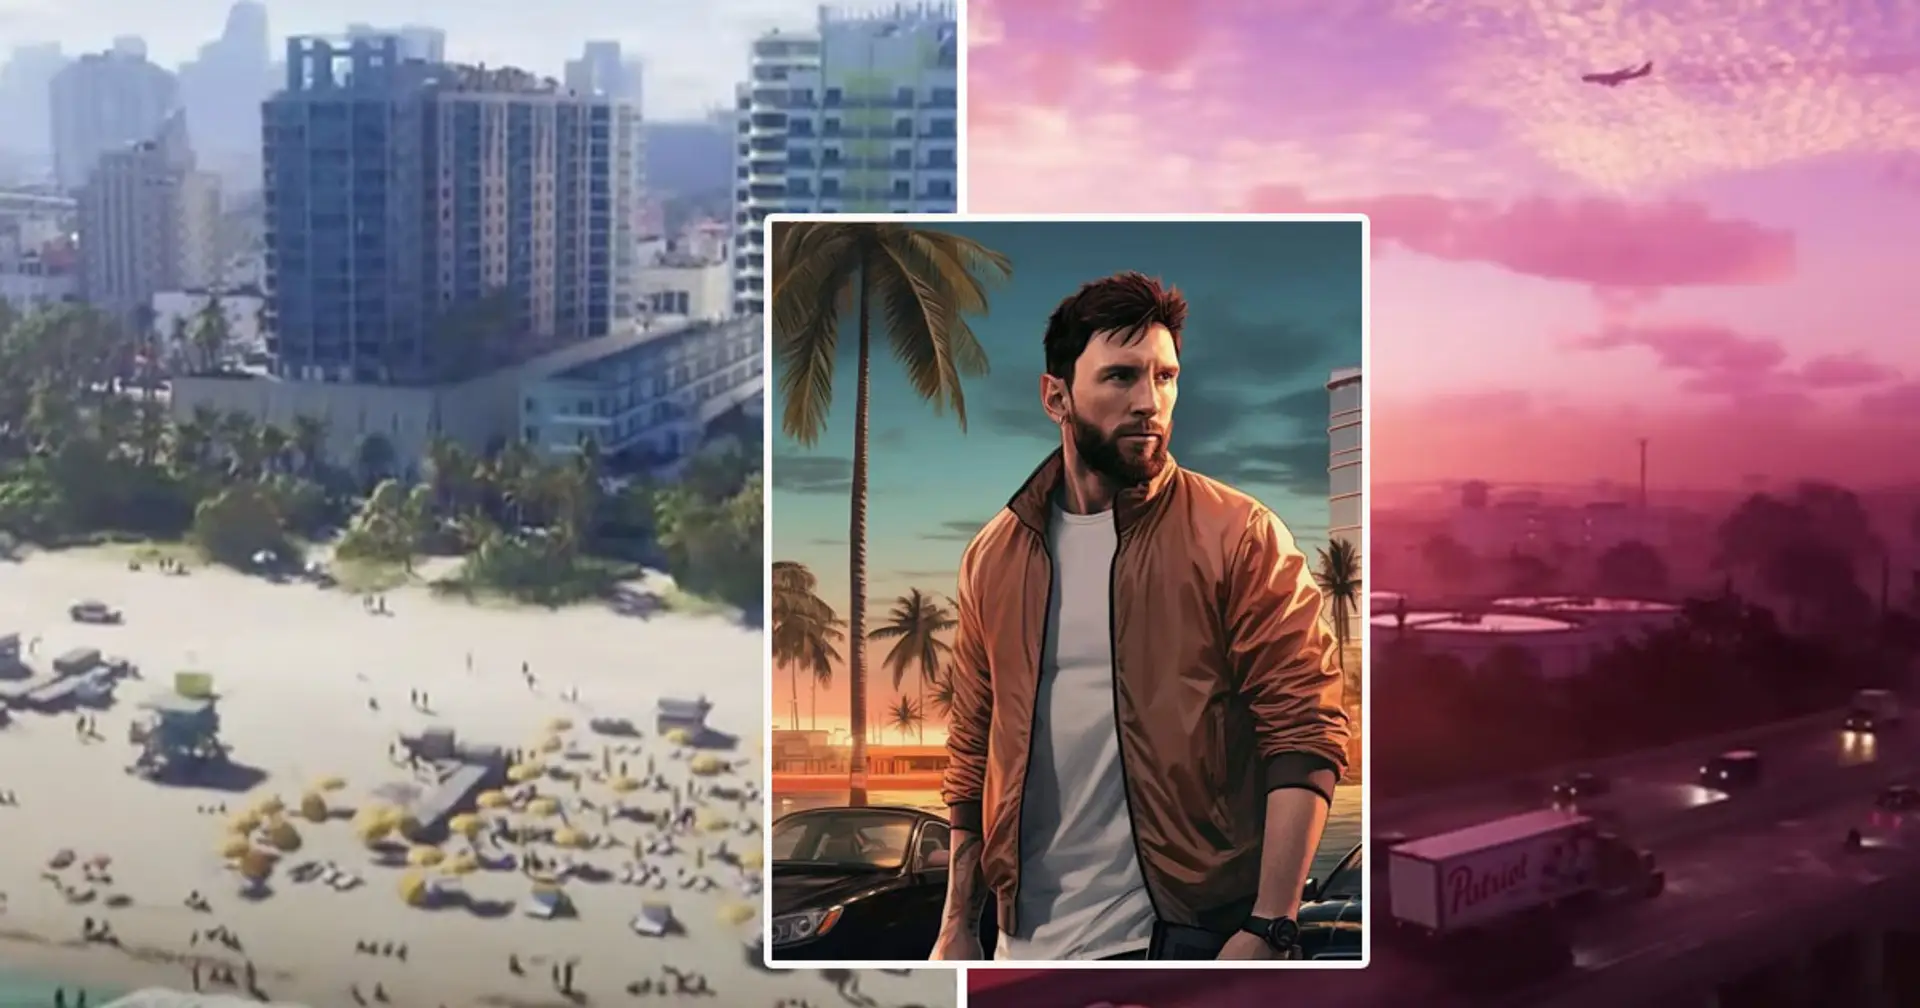 'Cop who's seen much s***': Fans react as 'GTA' image of Leo Messi emerges online